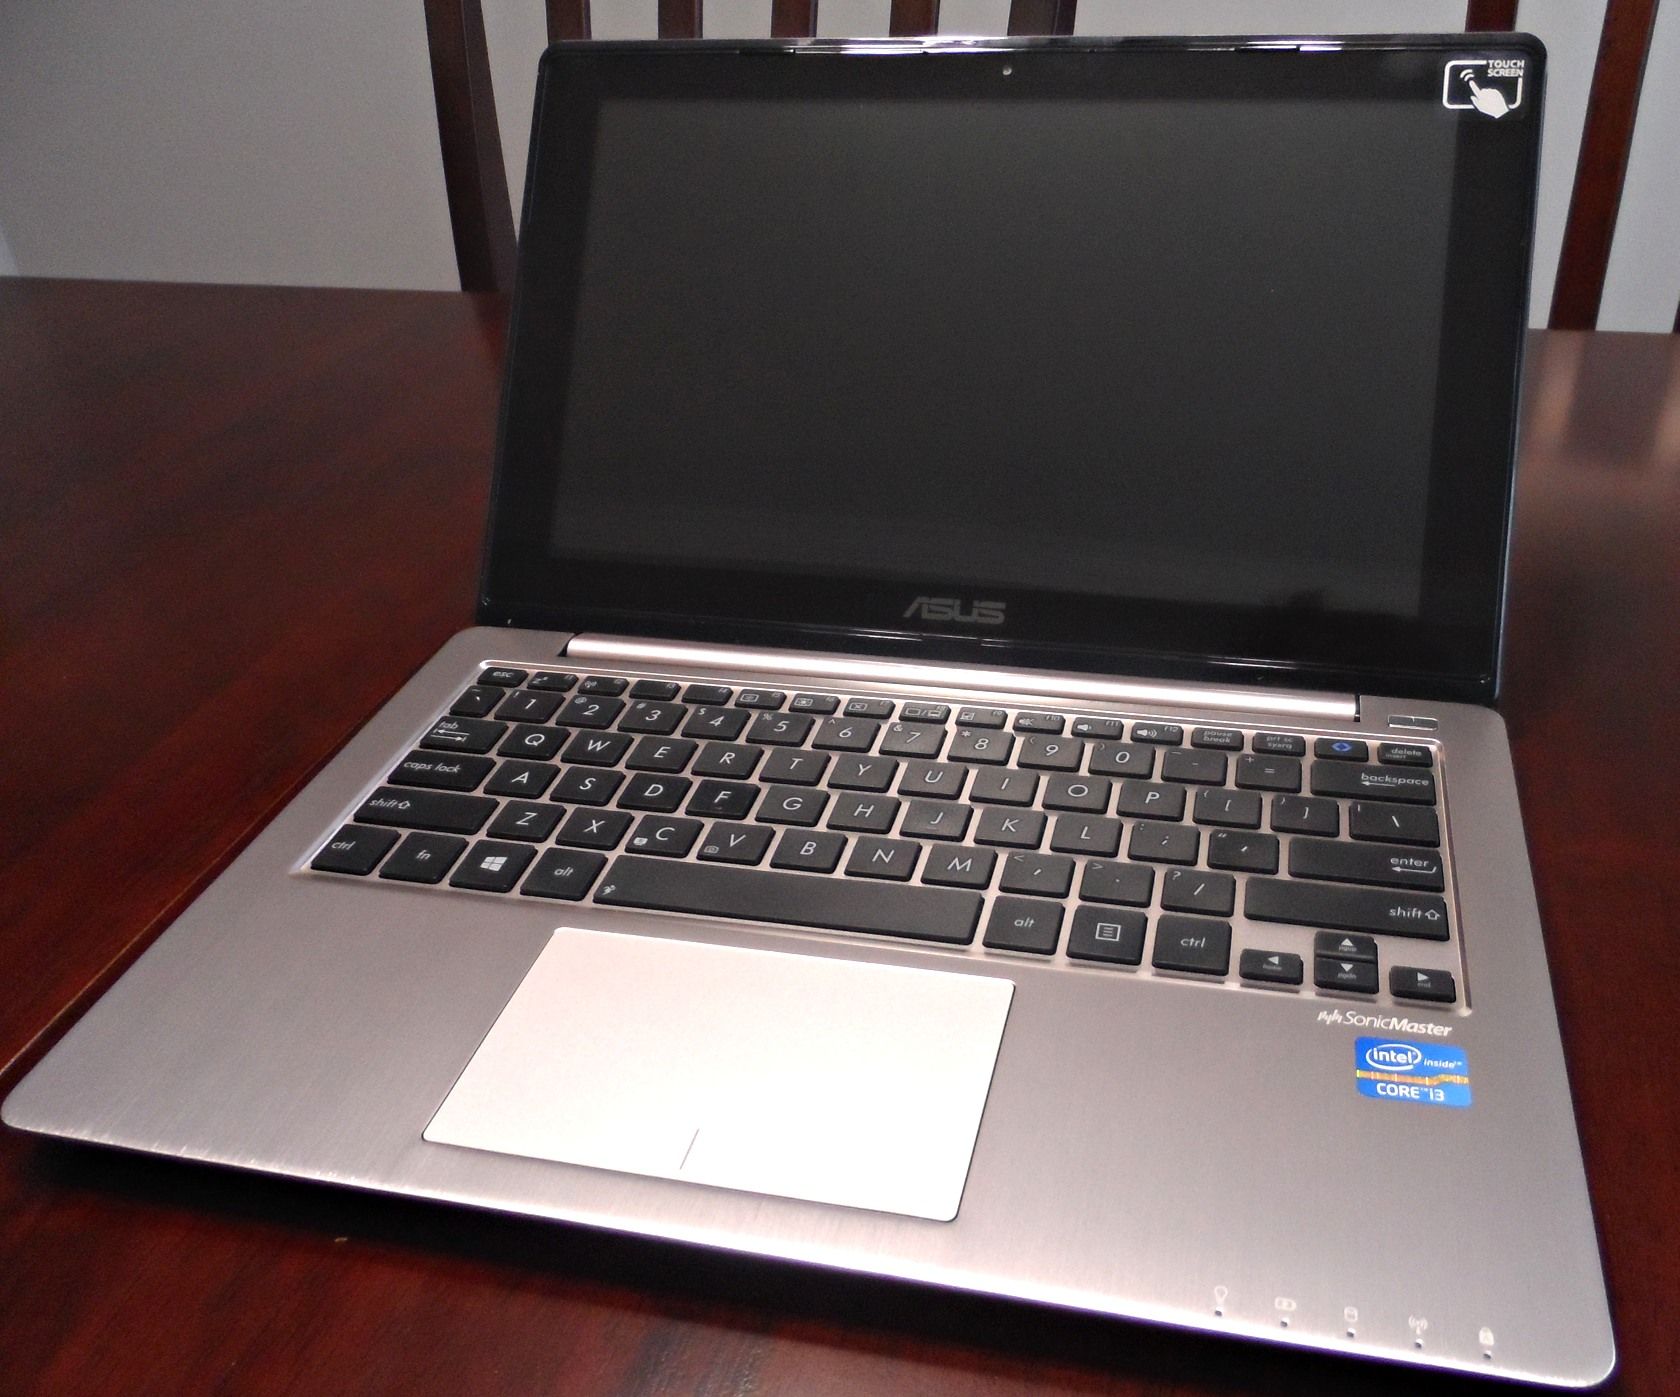 Asus Vivobook X202e Windows 8 Touchscreen Laptop Review And Giveaway